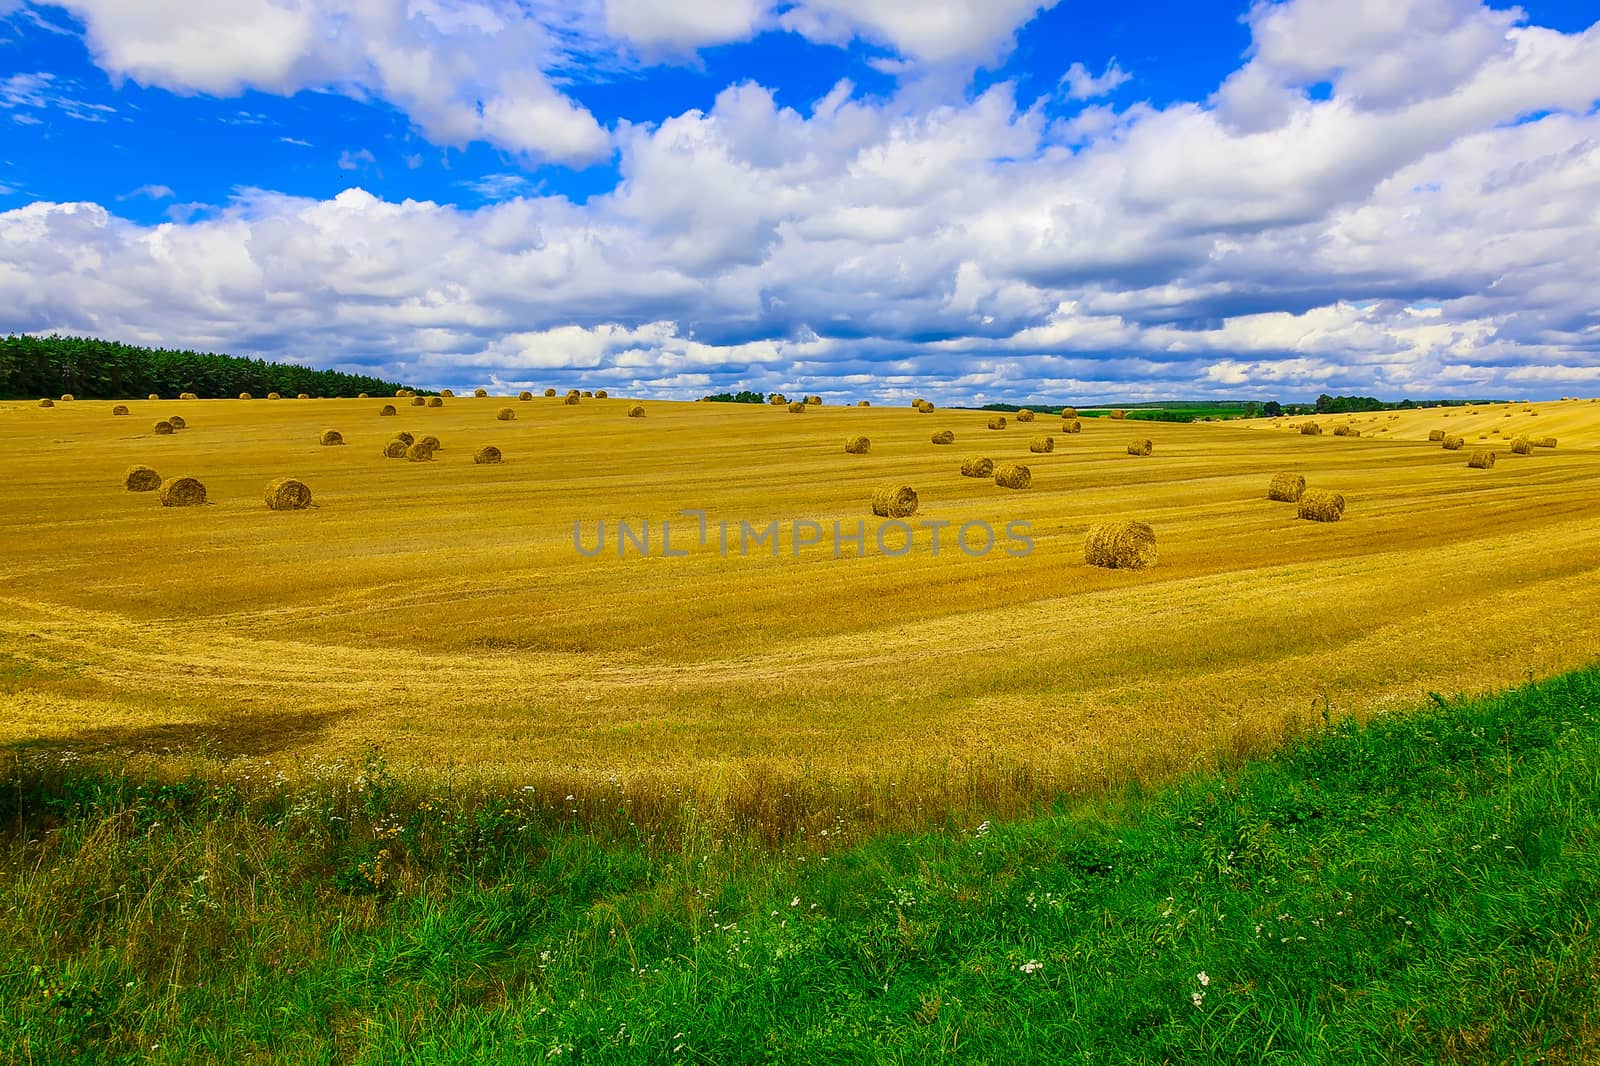 Round, Yellow Straw Bales in a Stubble Field at end of Summer at Day with Clouds, Blue Sky after Harvest